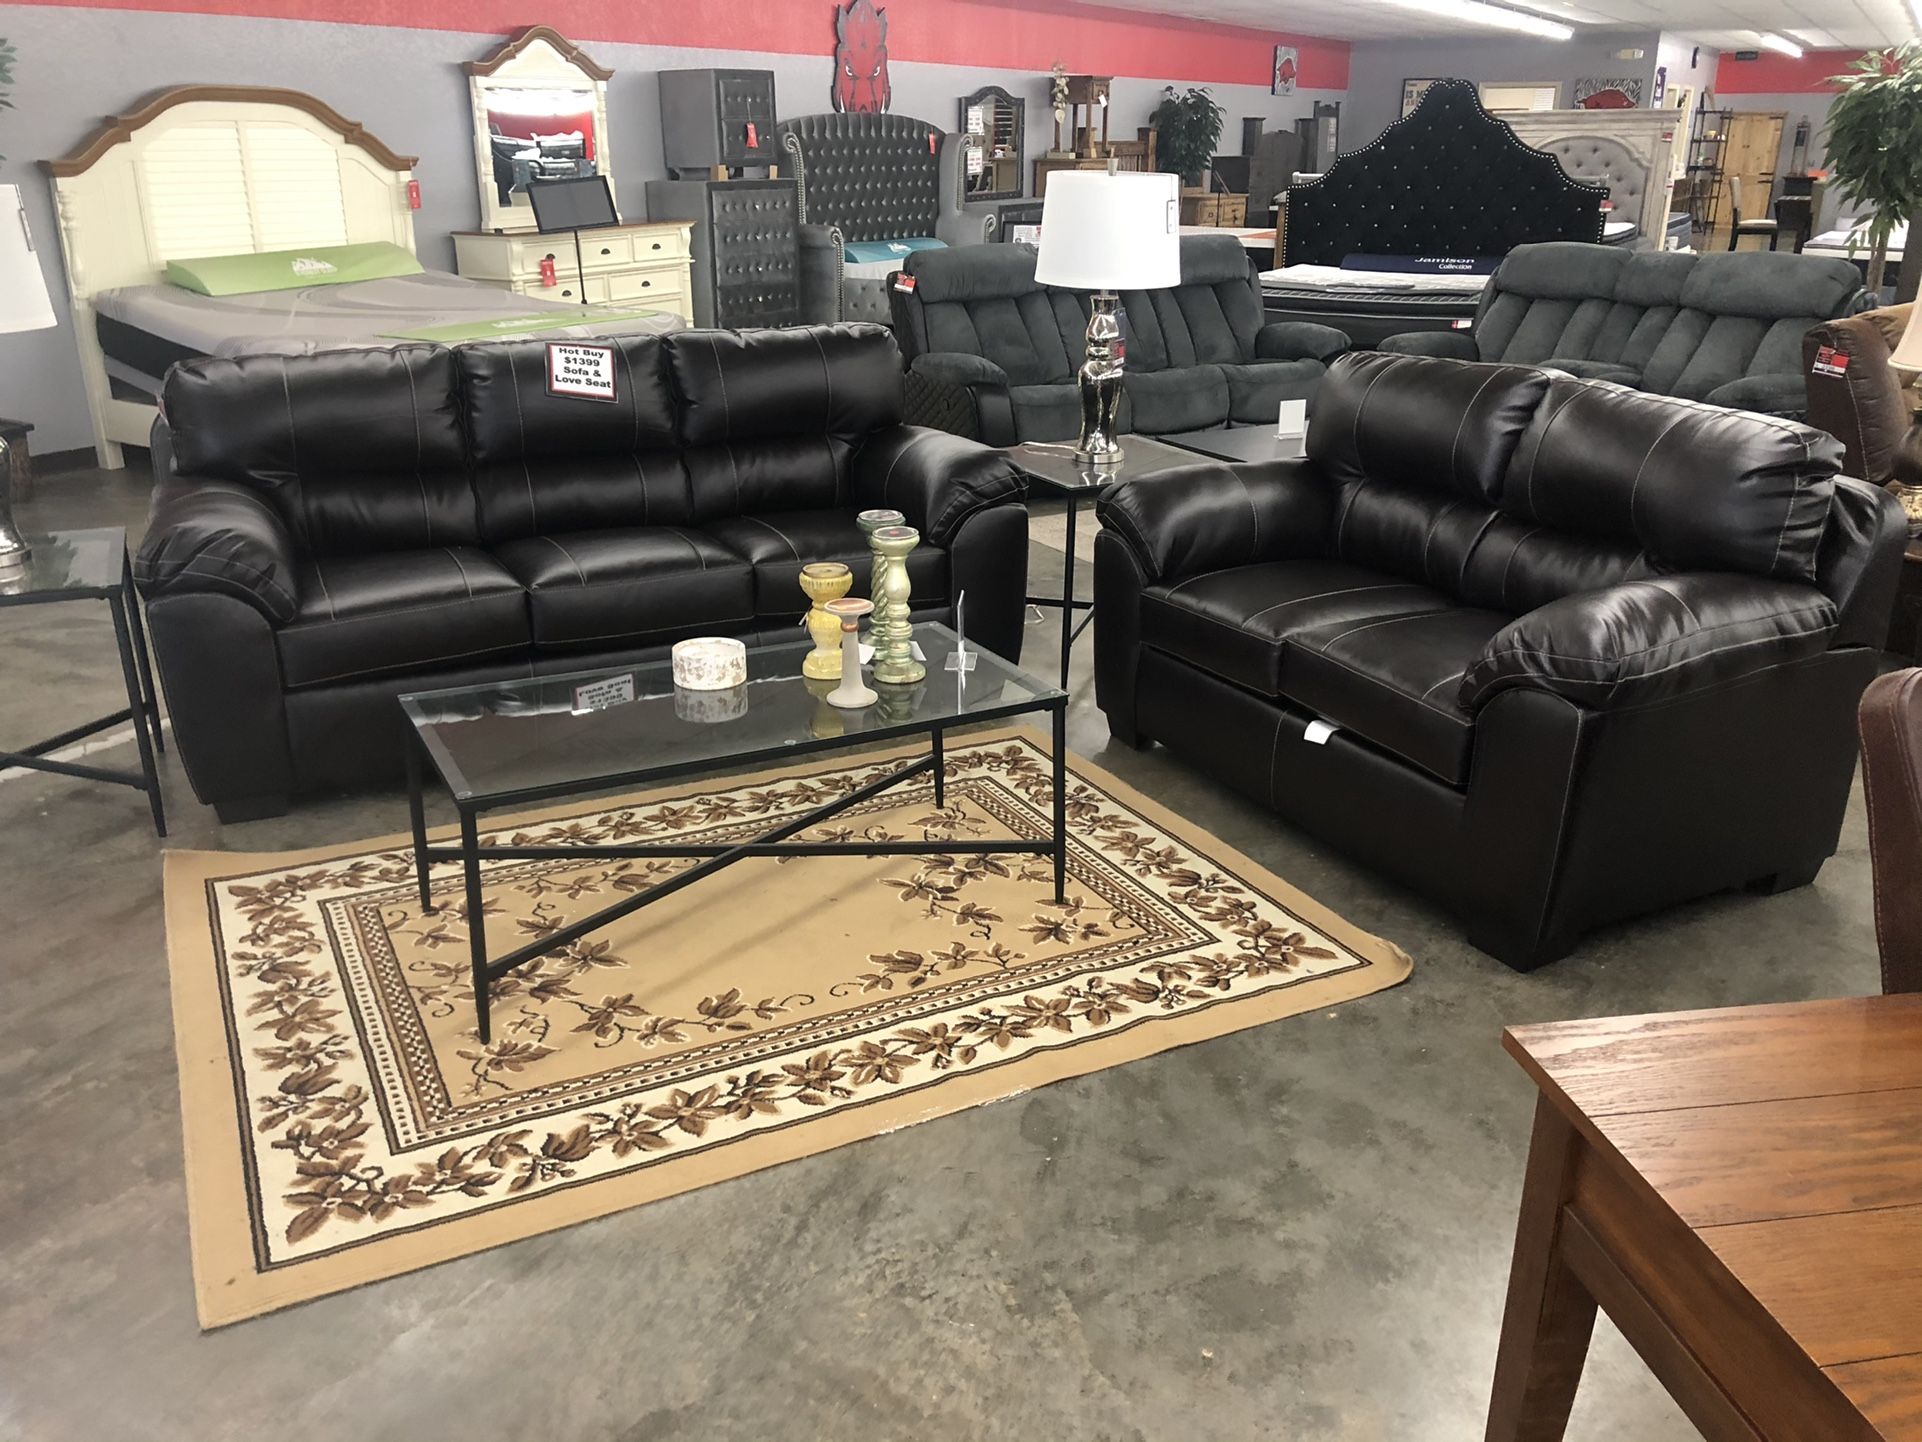 All Black Stationary Sofa And Love Seat Combo On Sale Now!! 